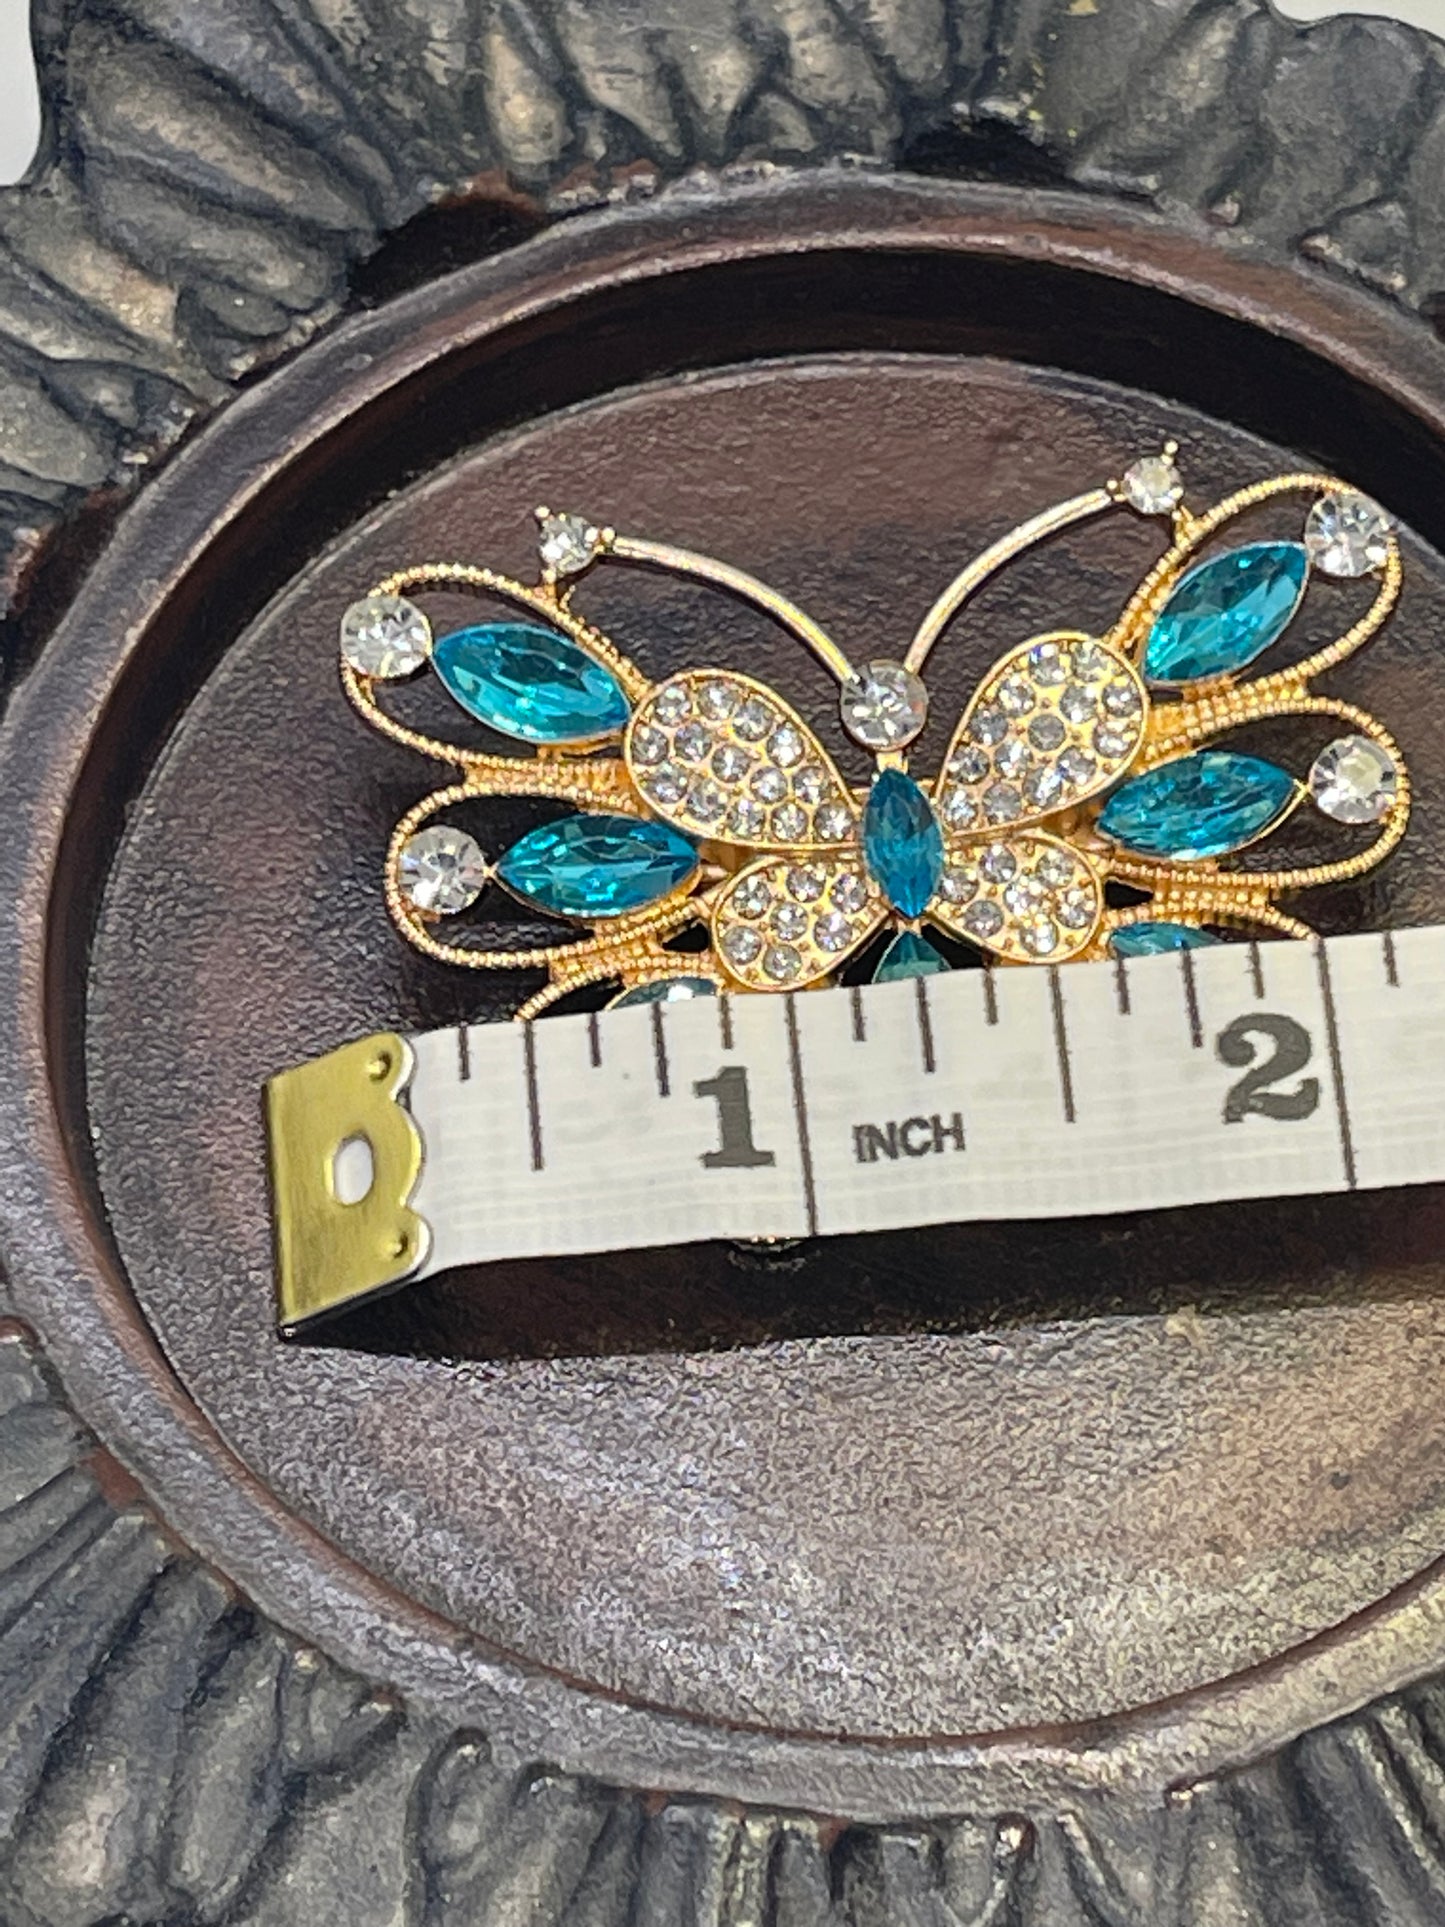 Luxe’s teal butterfly Crystal Brooch Rhinestone gold tone woman with rhinestone gift scarf accessory